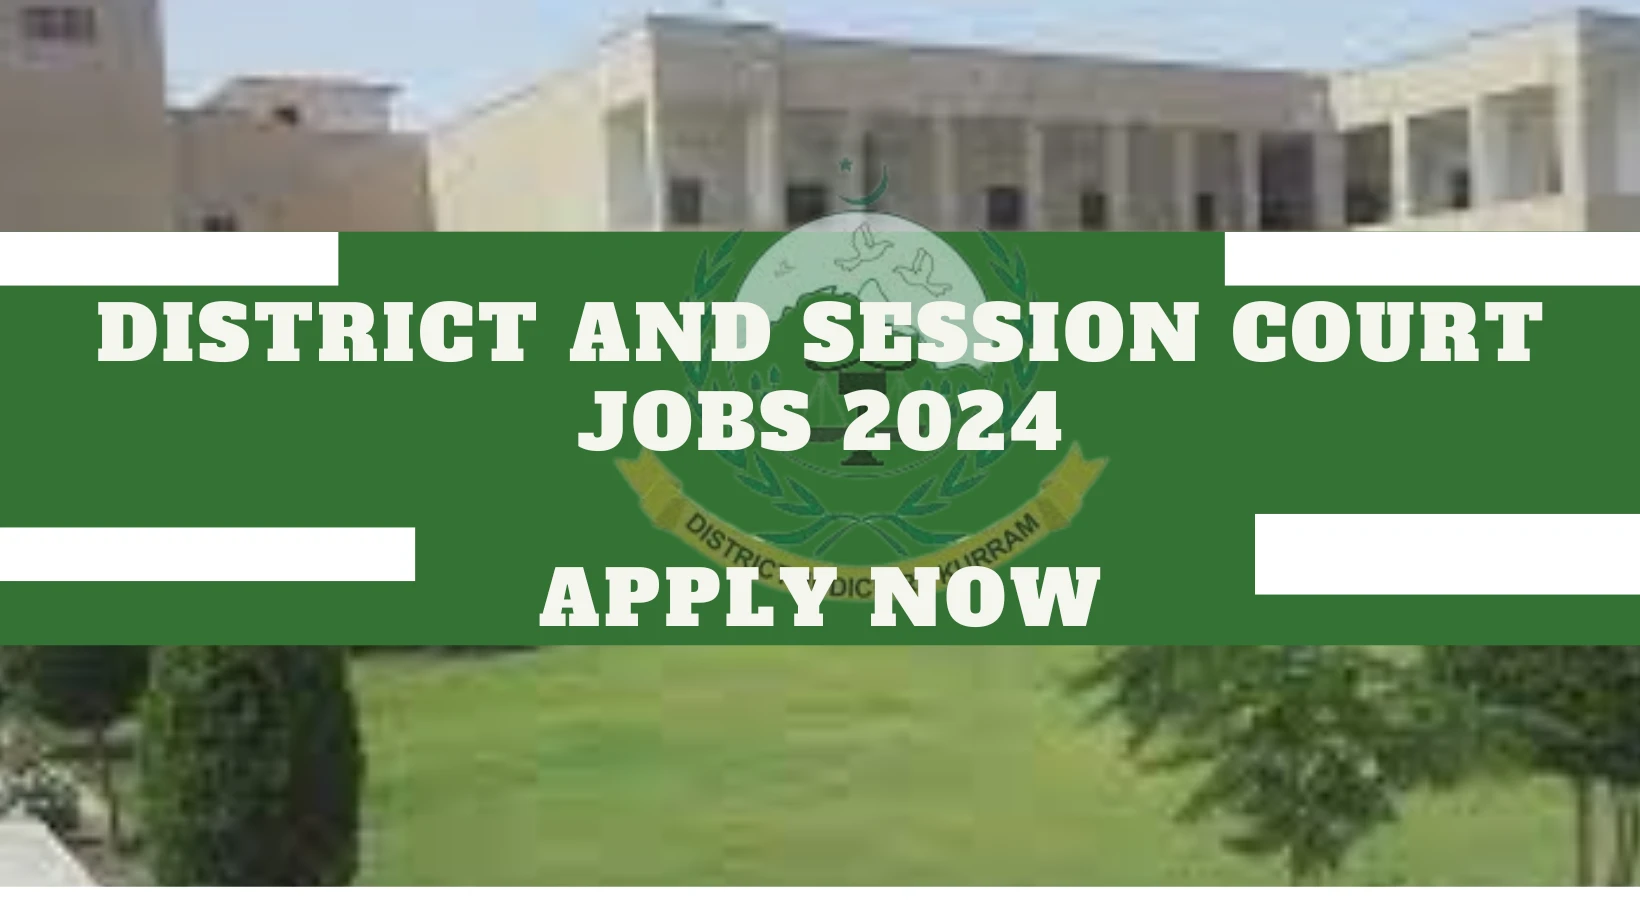 DISTRICT AND SESSION COURT JOBS